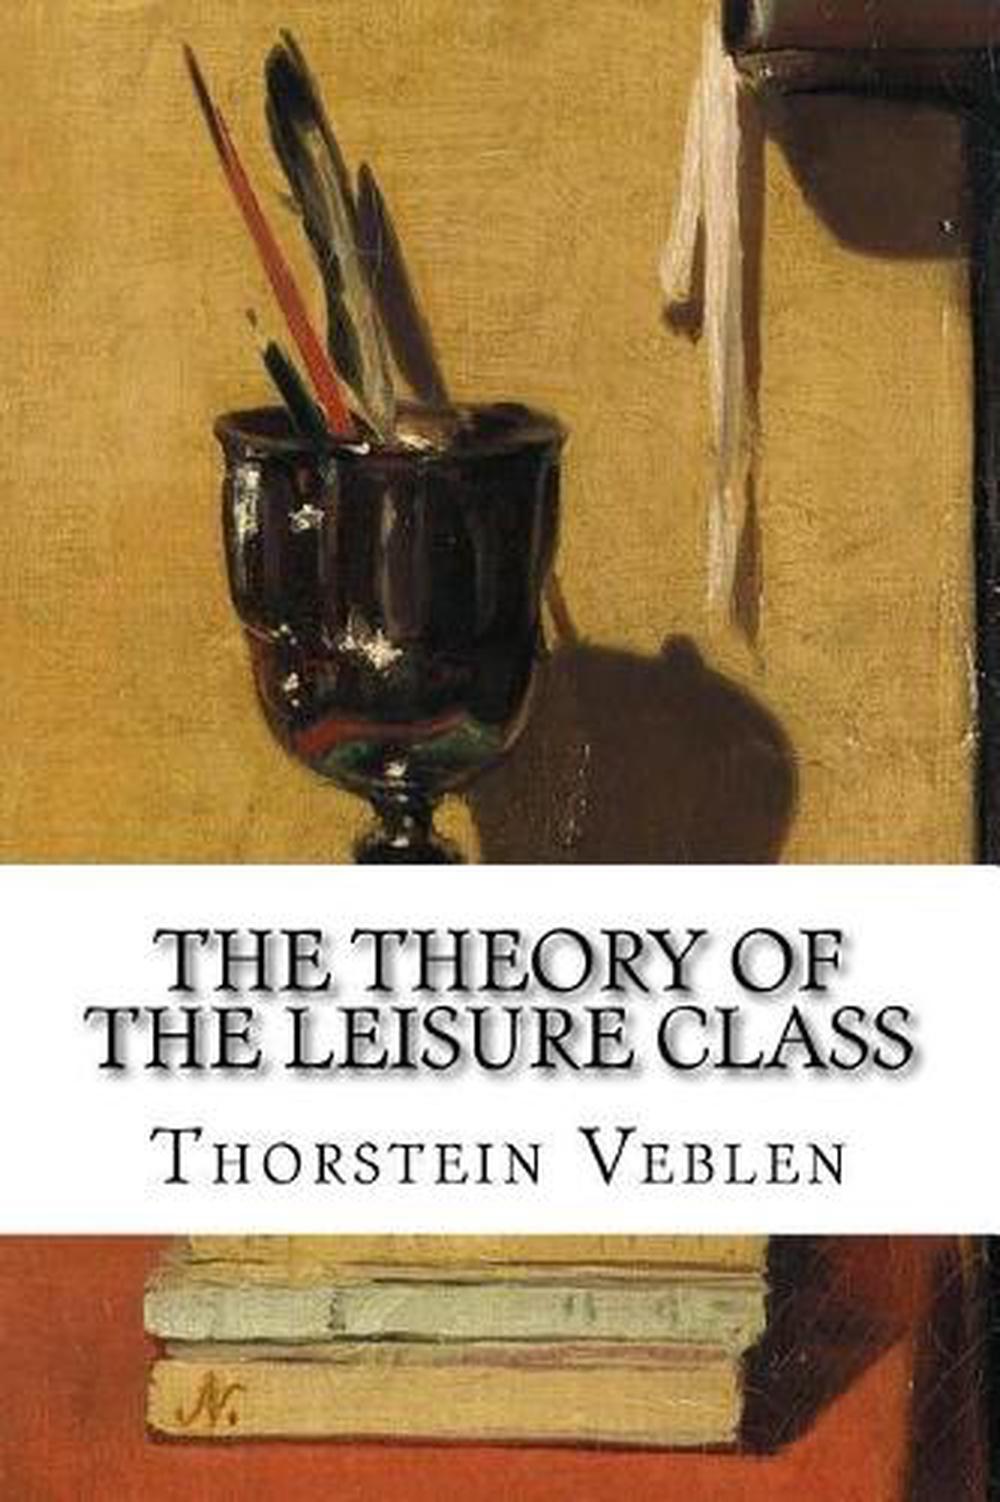 the theory of the leisure class amazon